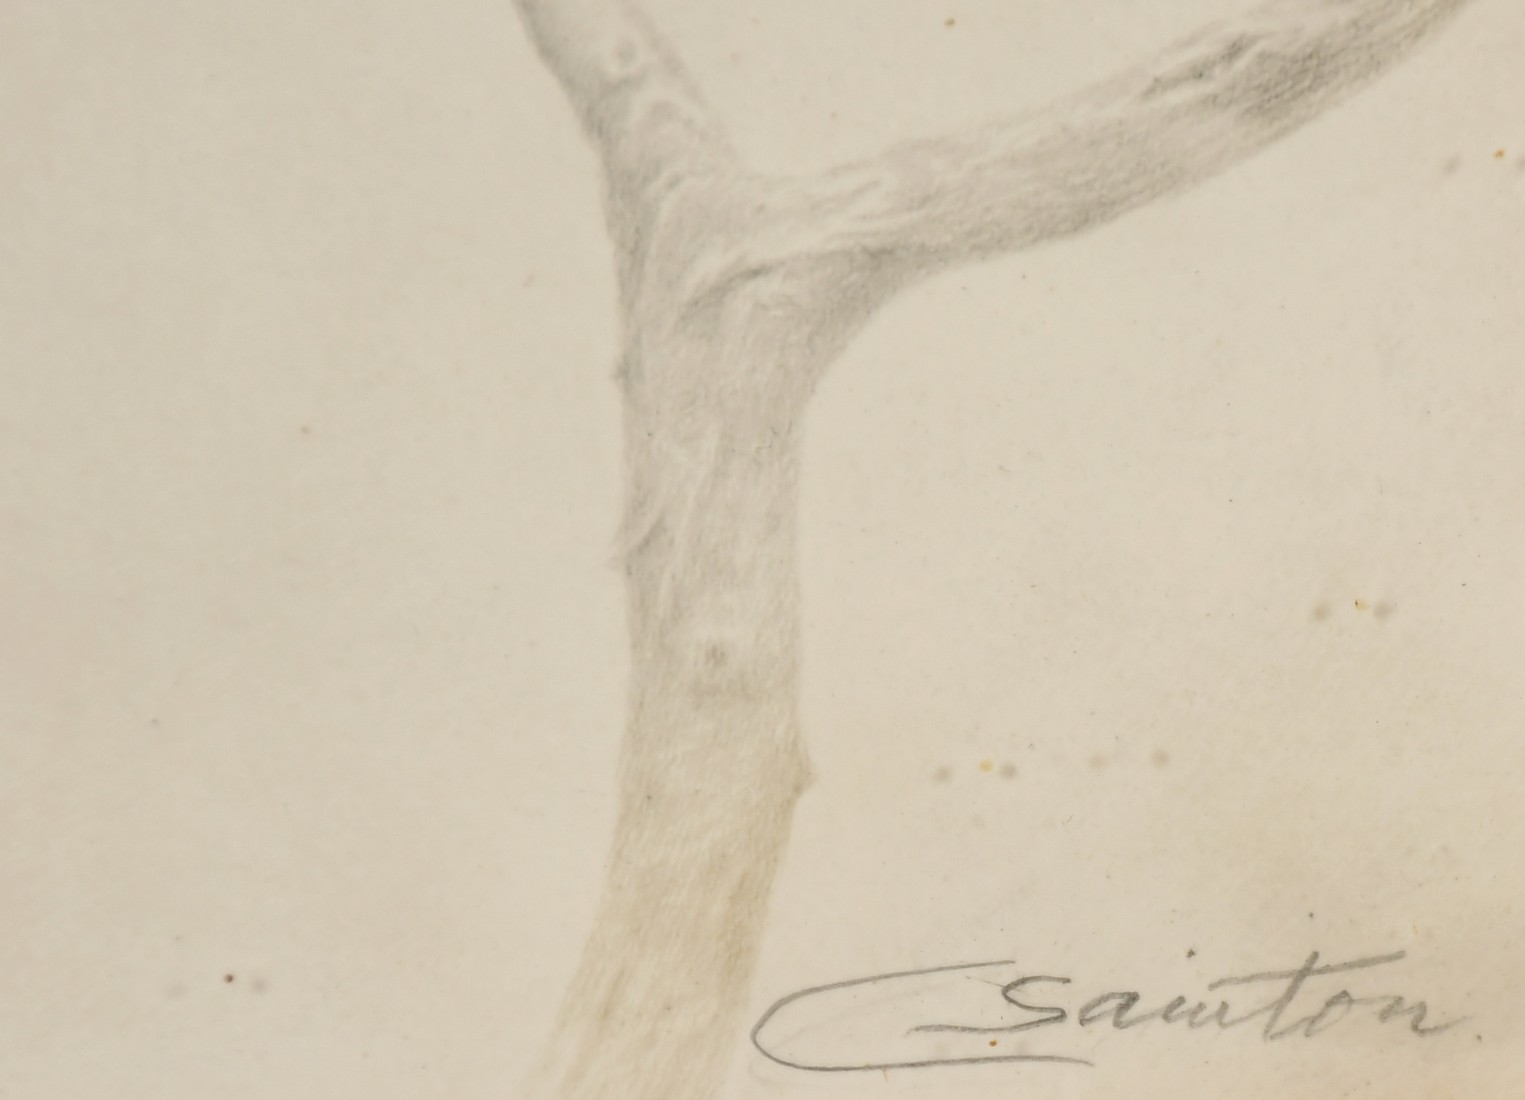 Charles Prosper Sainton (1861-1914), an angel on a branch, silverpoint drawing, signed in pencil, - Image 3 of 4